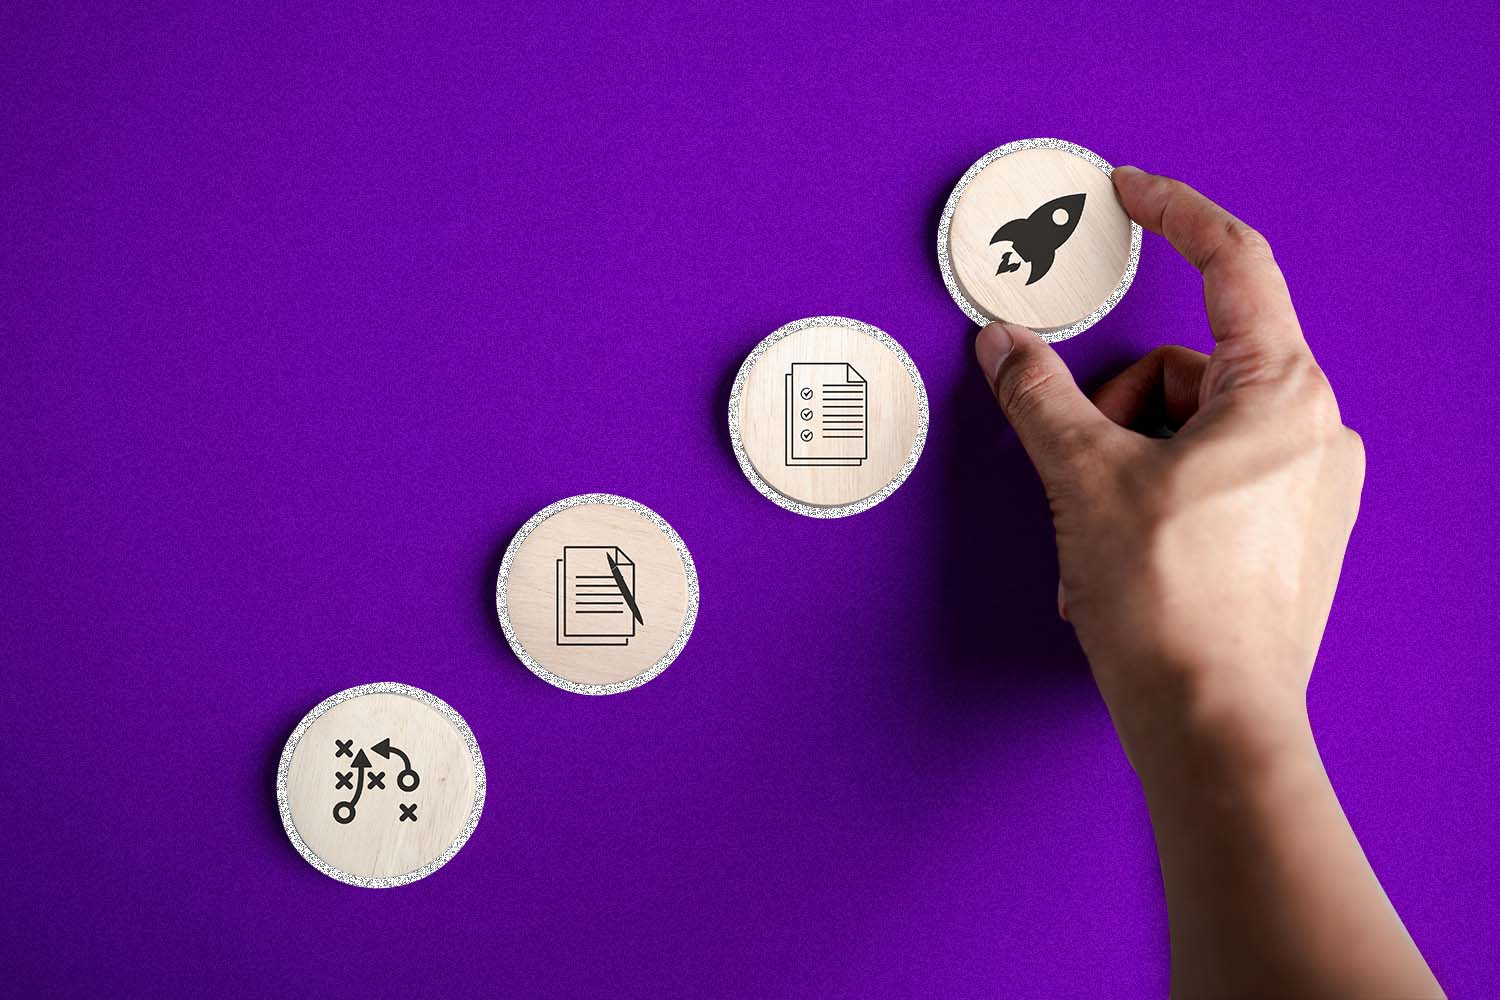 A purple background with four wooden coins positioned to ascend from the bottom left to top right. A person's hand holds the top coin that has the image of a rocket on it.